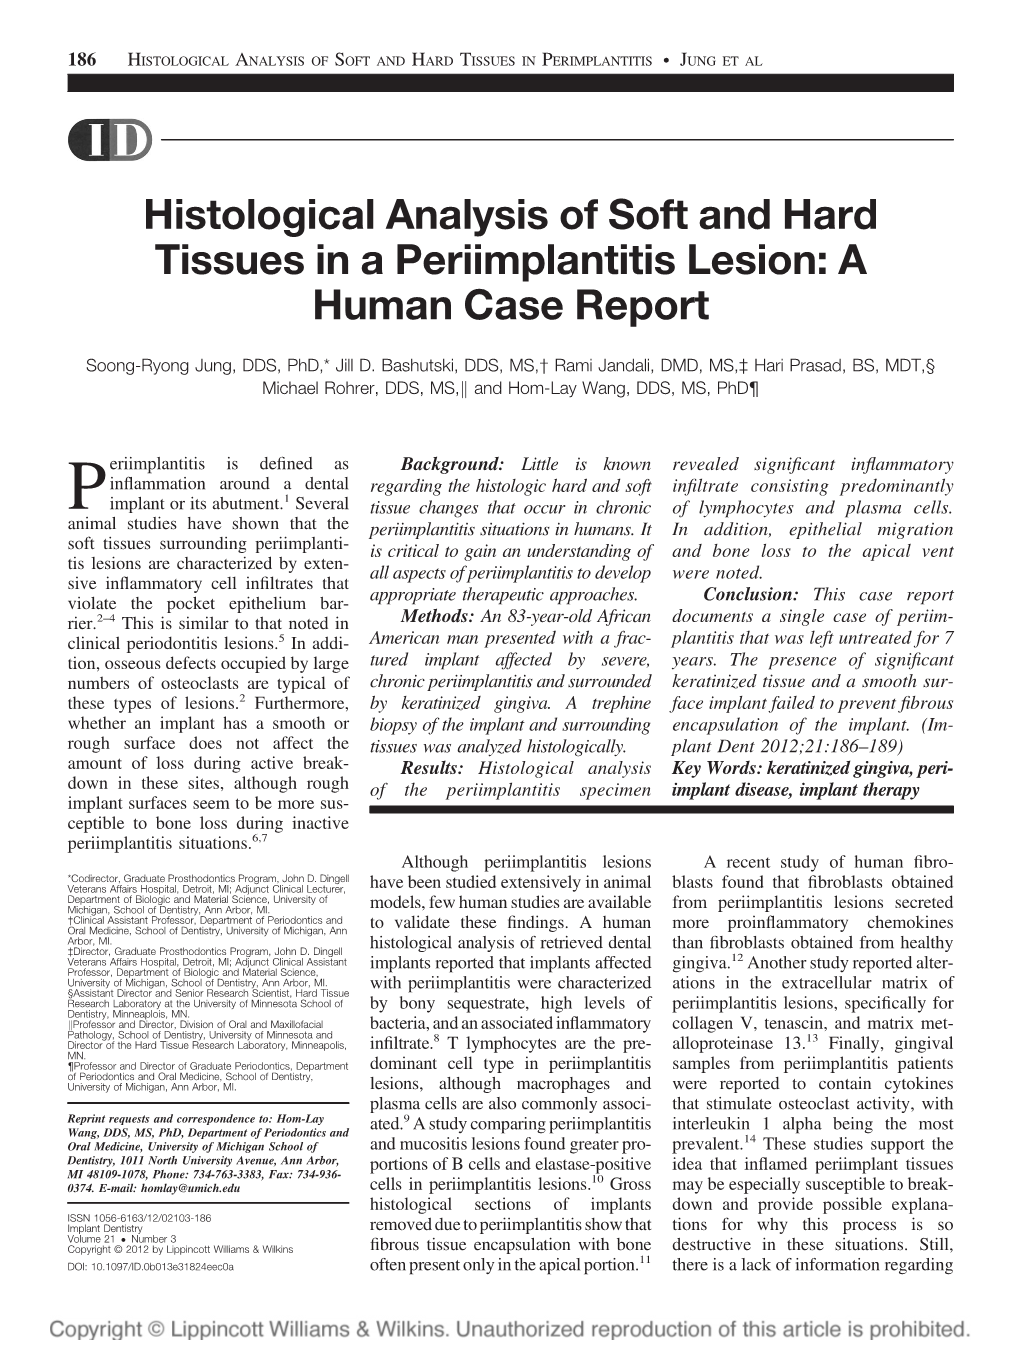 Histological Analysis of Soft and Hard Tissues in a Periimplantitis Lesion: a Human Case Report